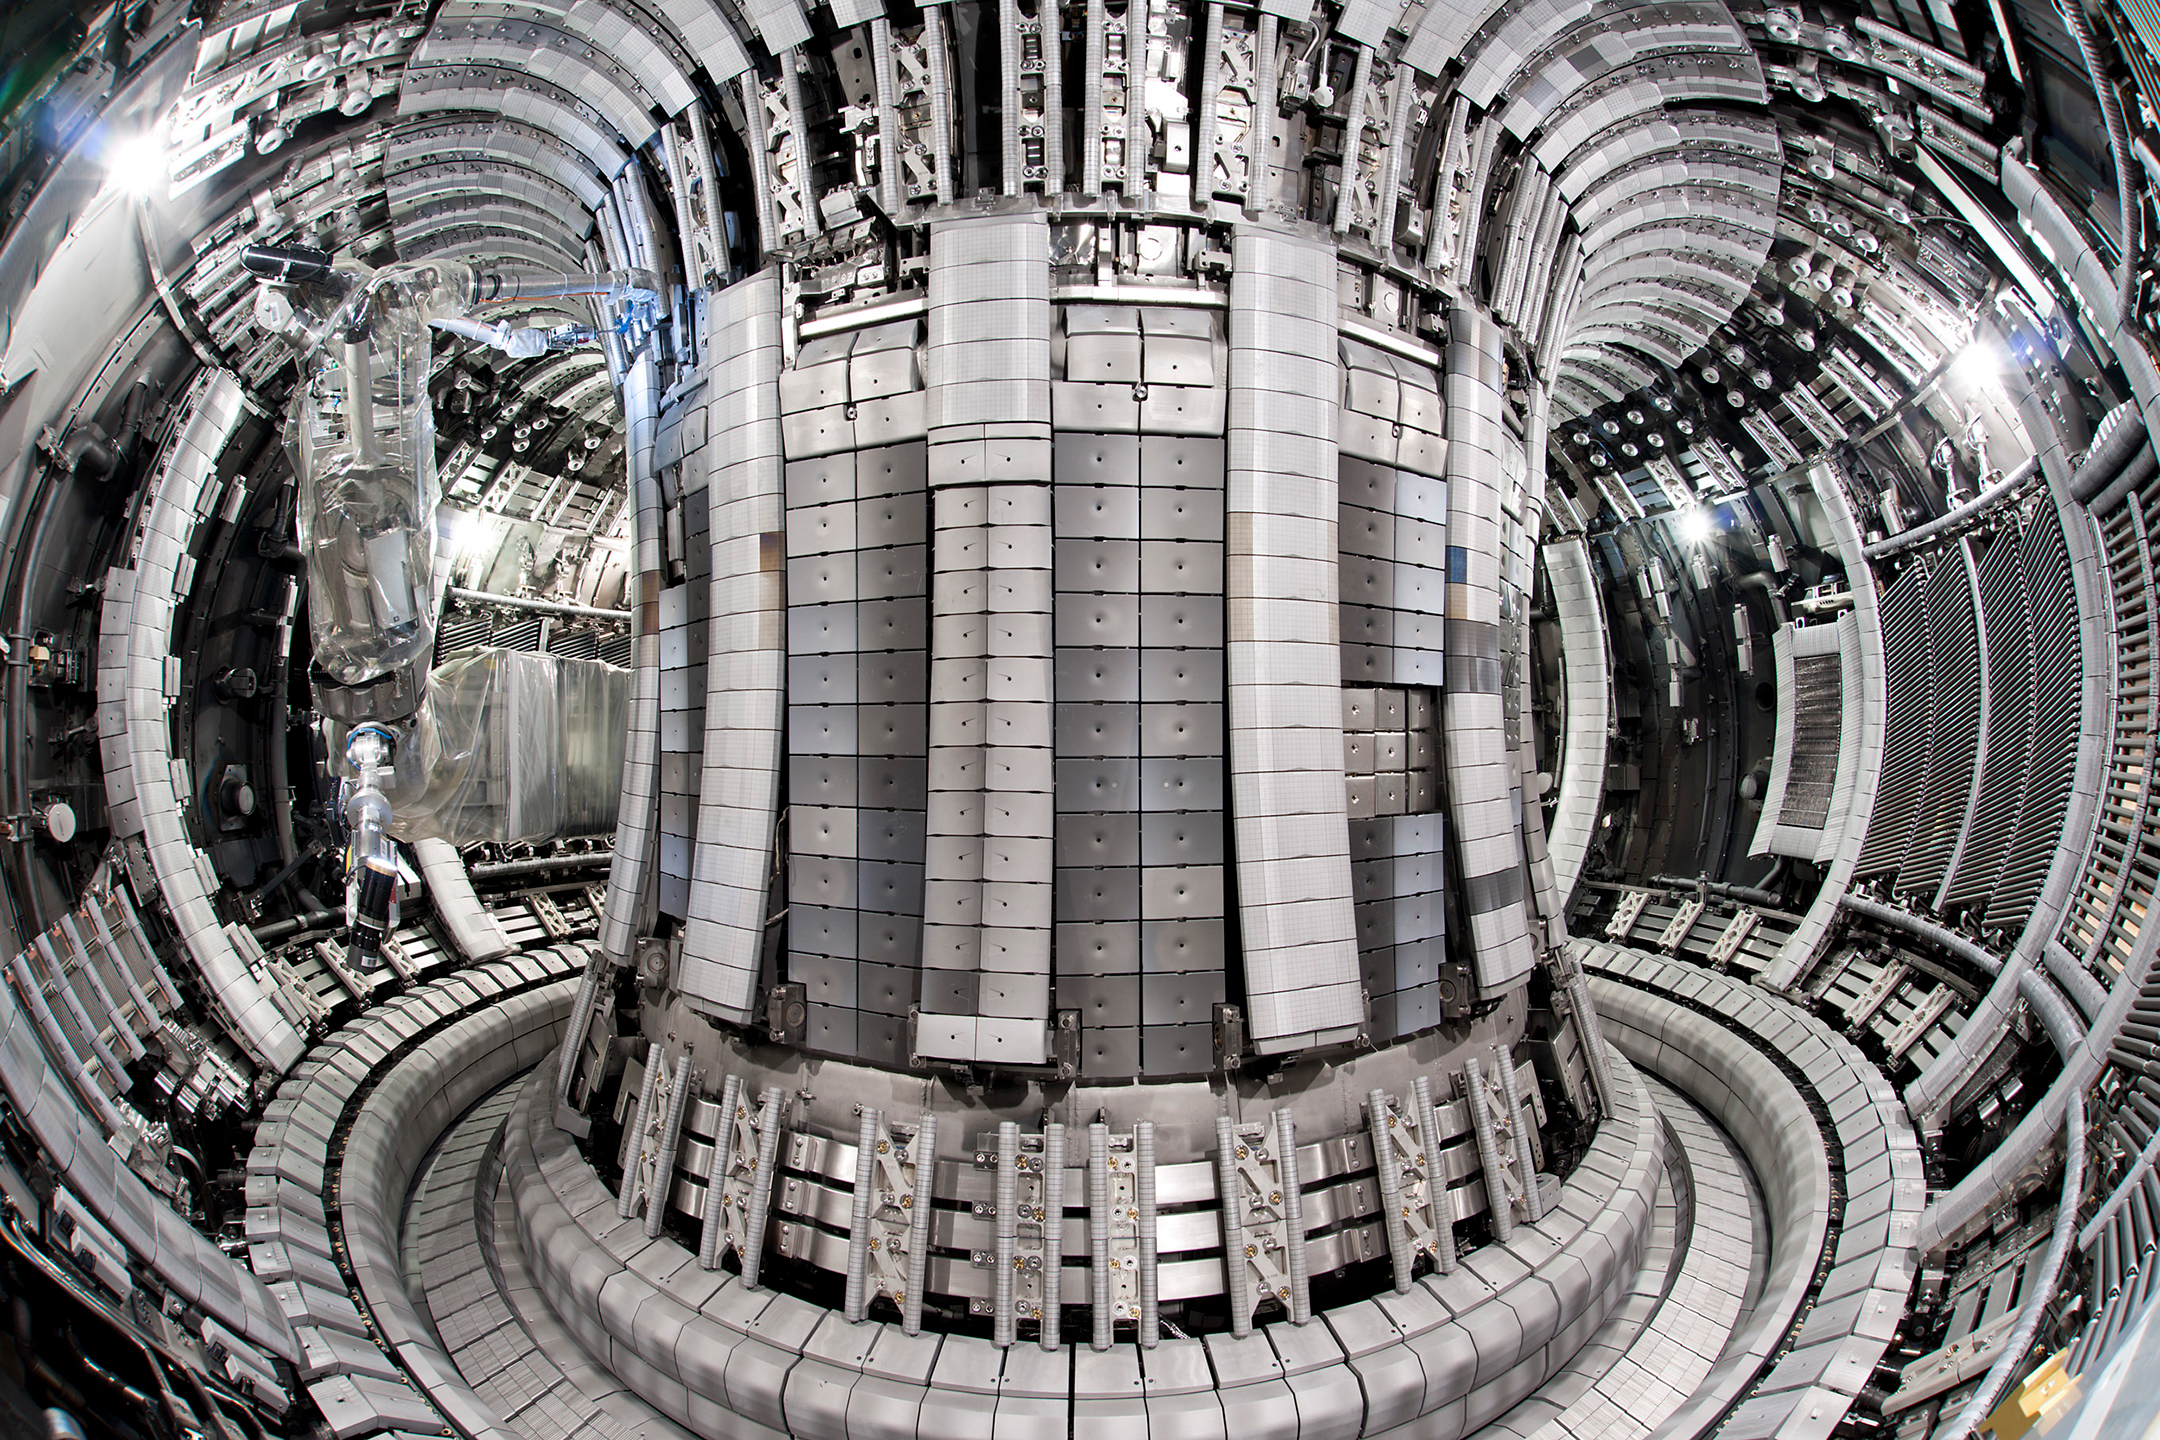 Internal view of JET Fusion reactor